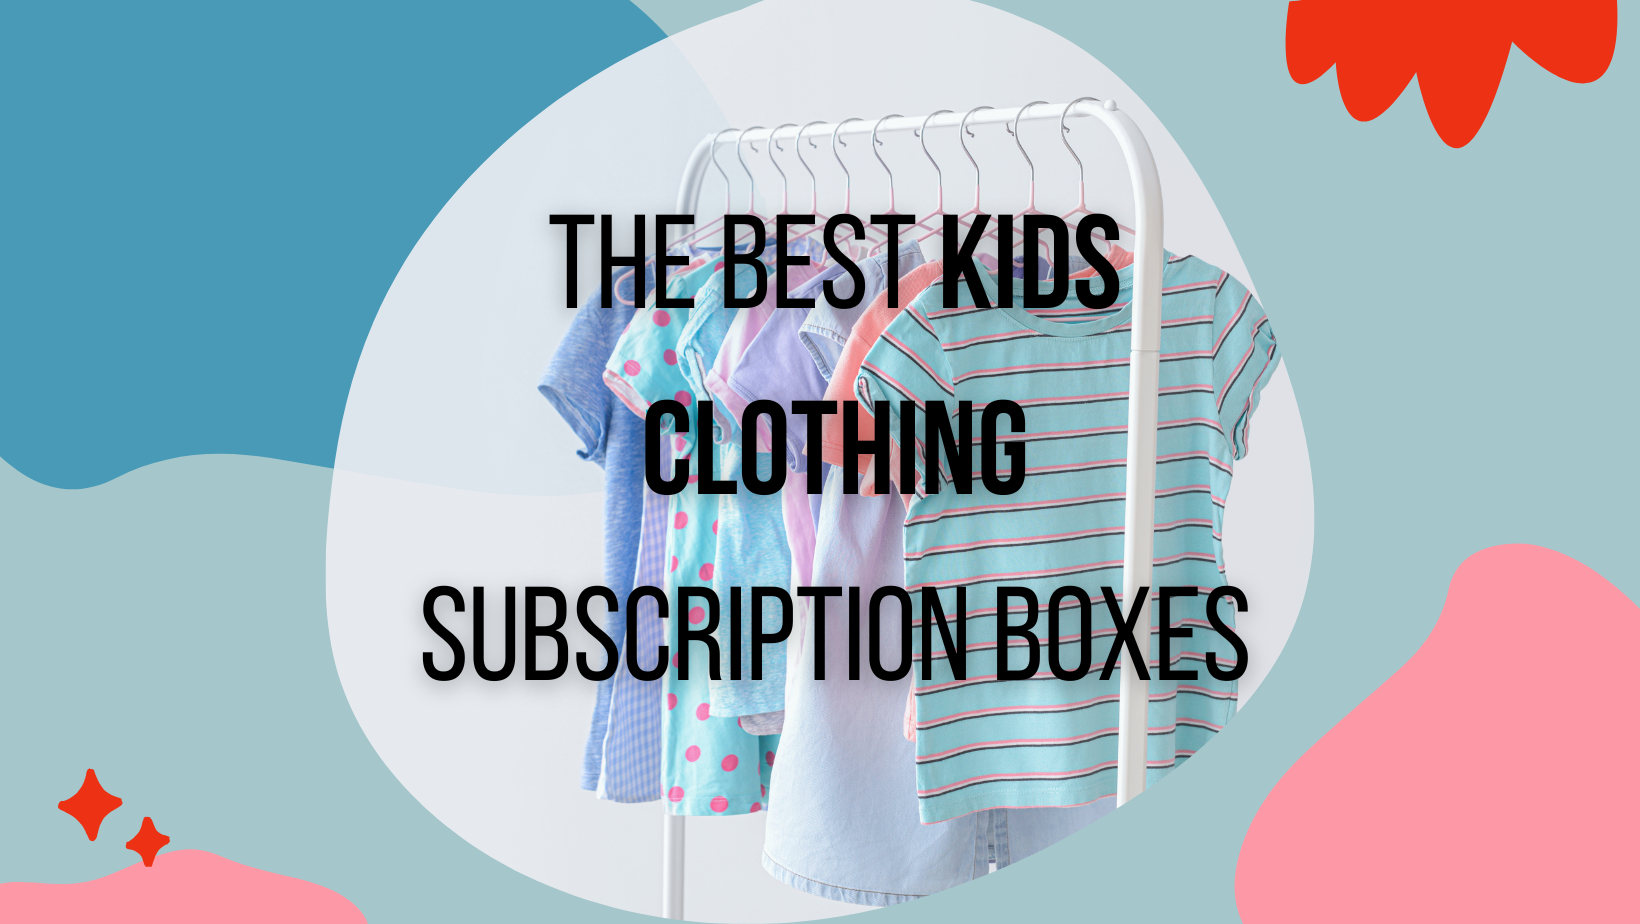 https://hellosubscription.com/wp-content/uploads/2023/04/bestkidsclothing.png?quality=90&strip=all